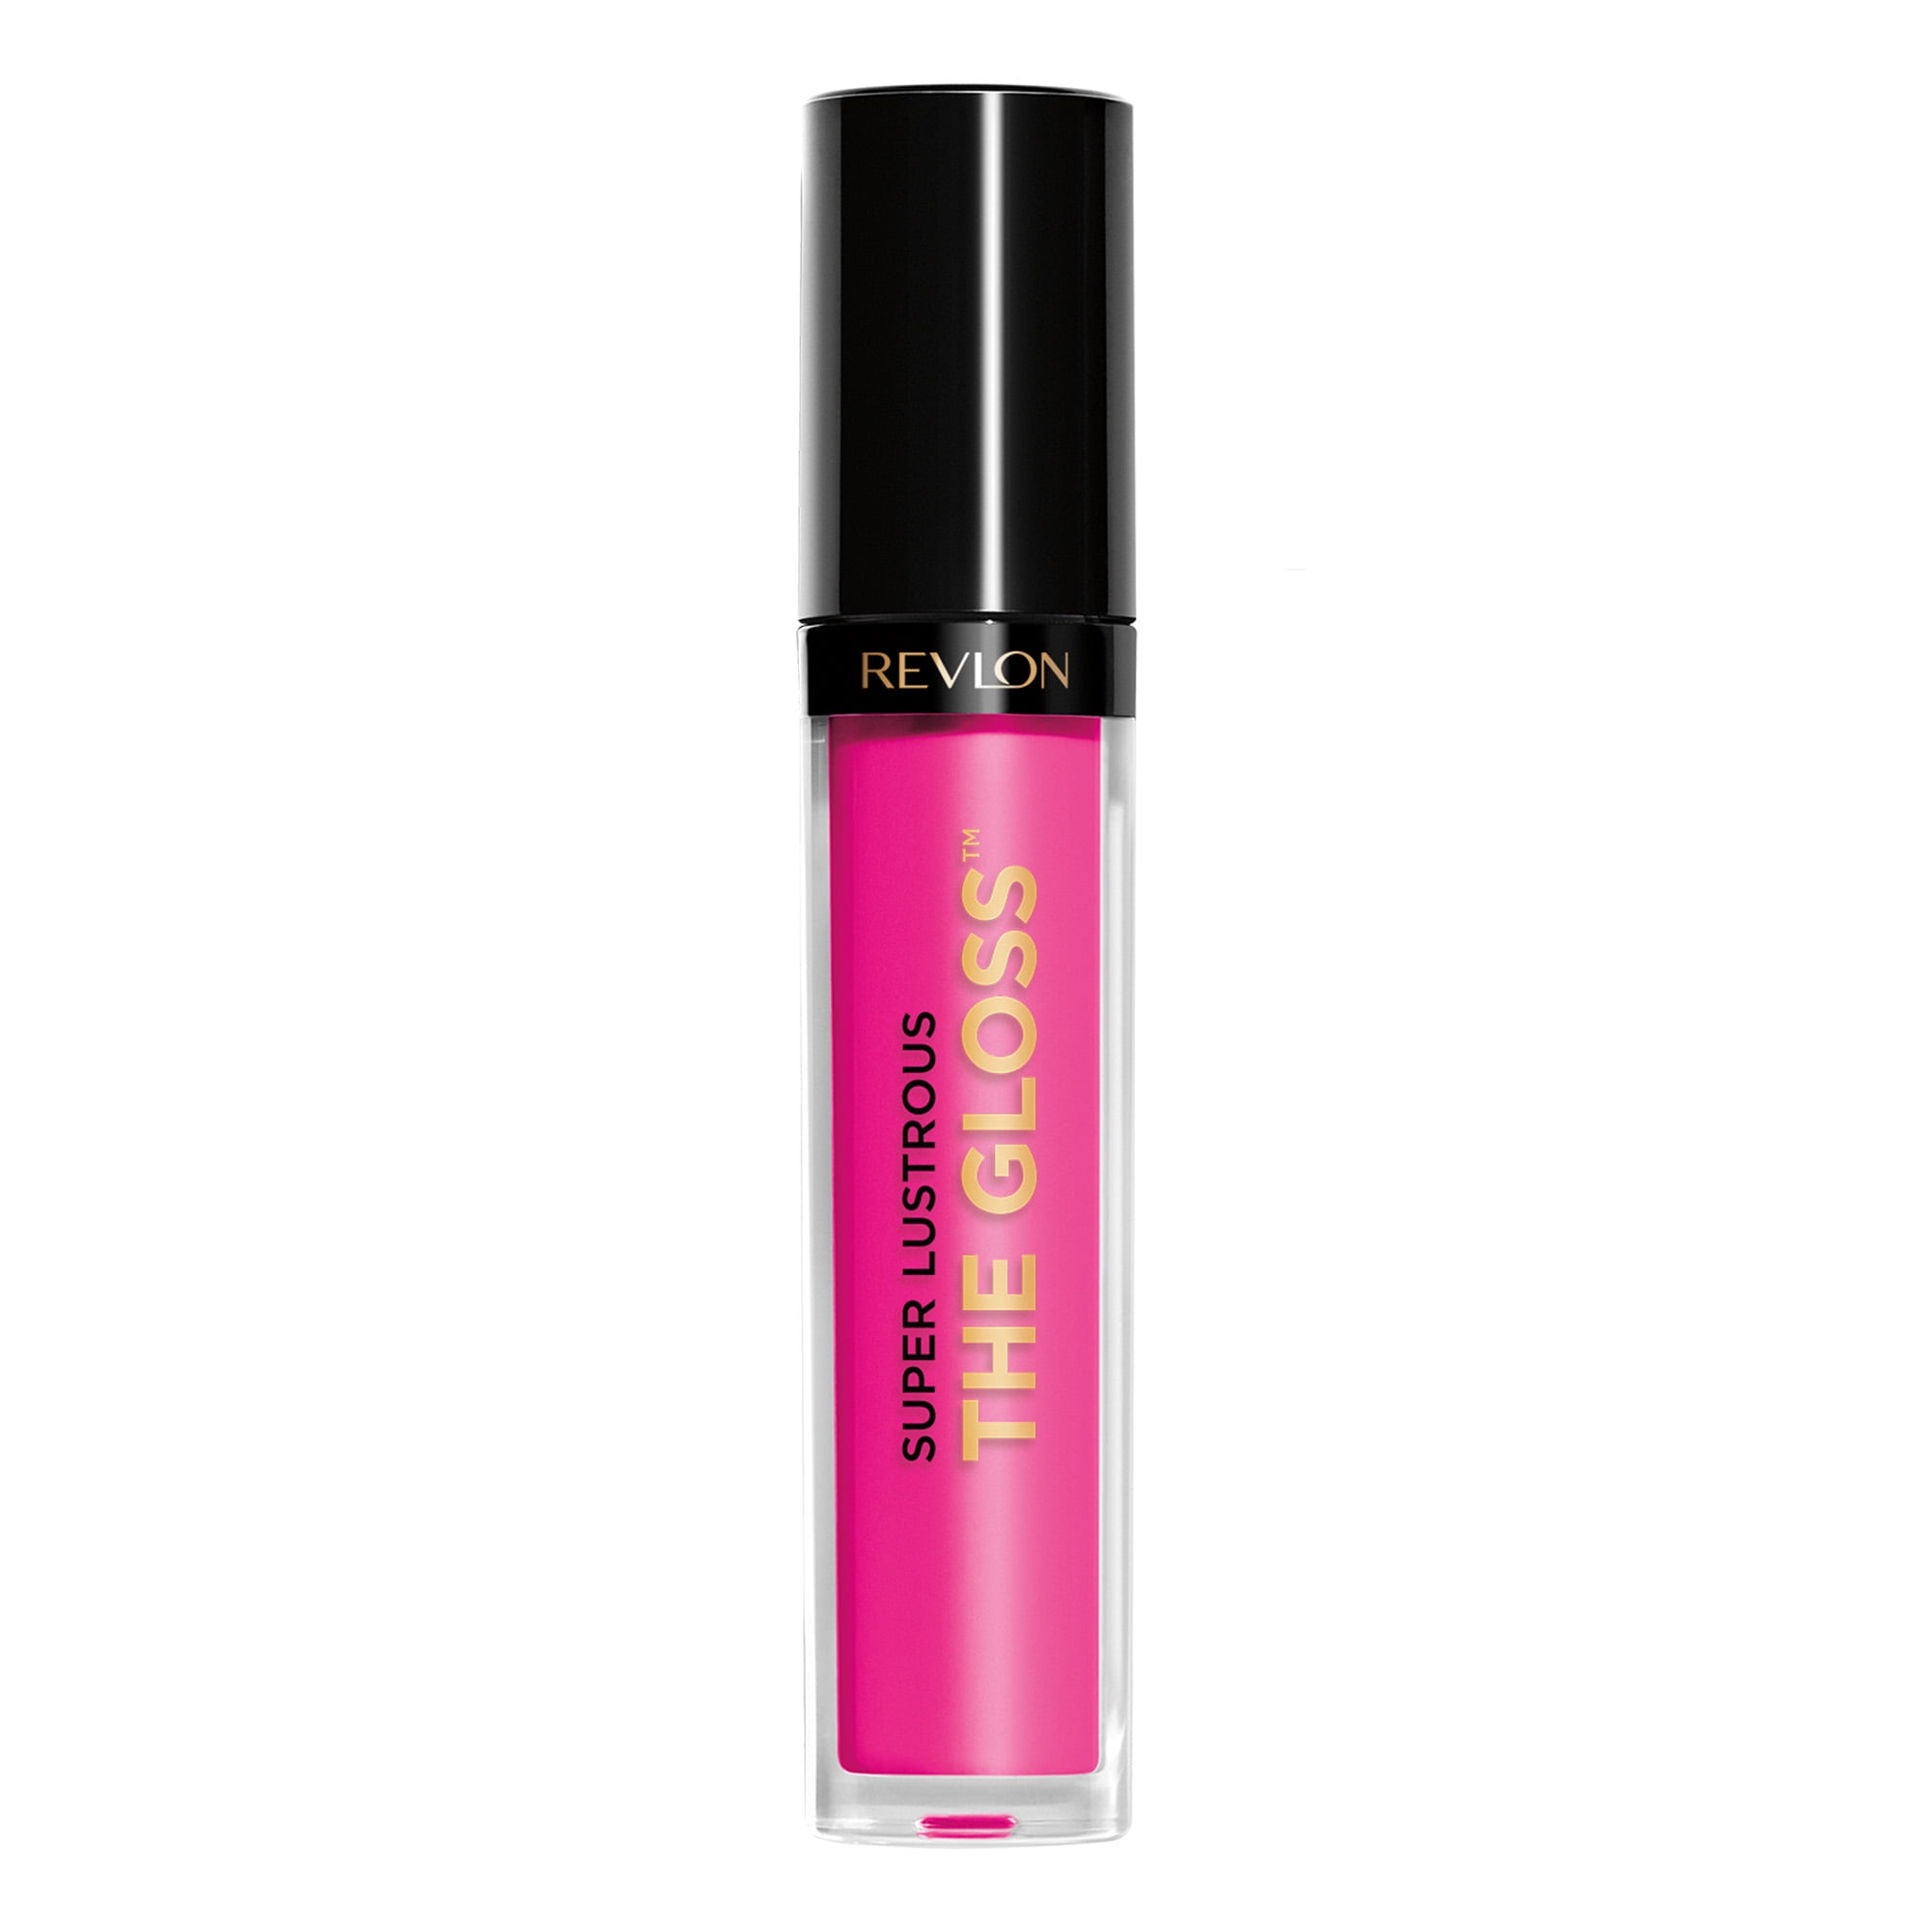 genstand Stereotype Dele Revlon Super Lustrous The Gloss, Non-Sticky, High Shine Finish, 232 Pink  Obsessed - Walmart.com